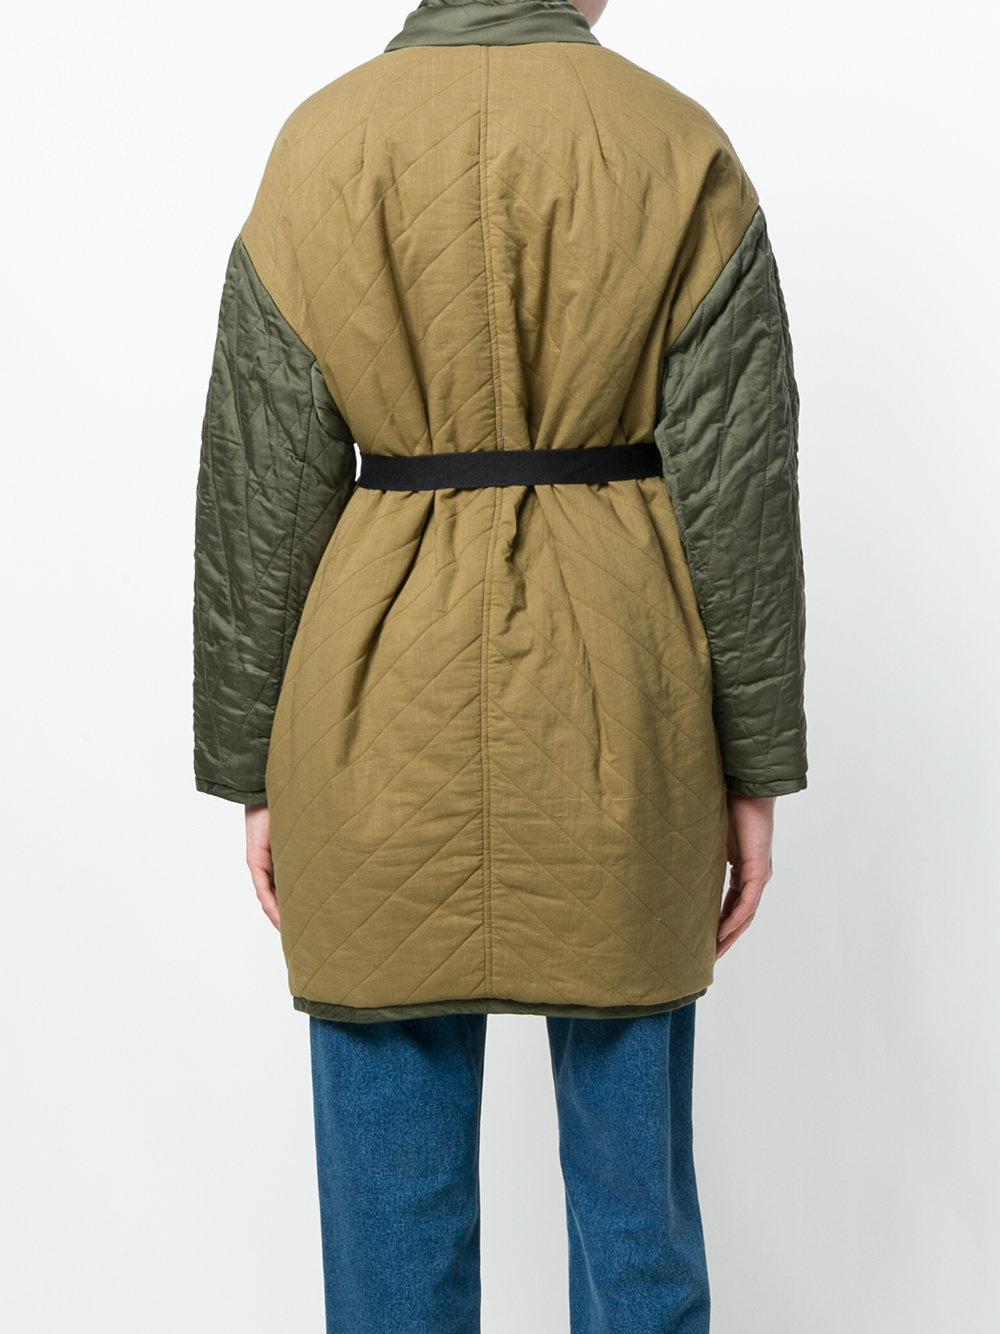 Étoile Isabel Marant Cotton Quilted Haley Coat in Green - Lyst